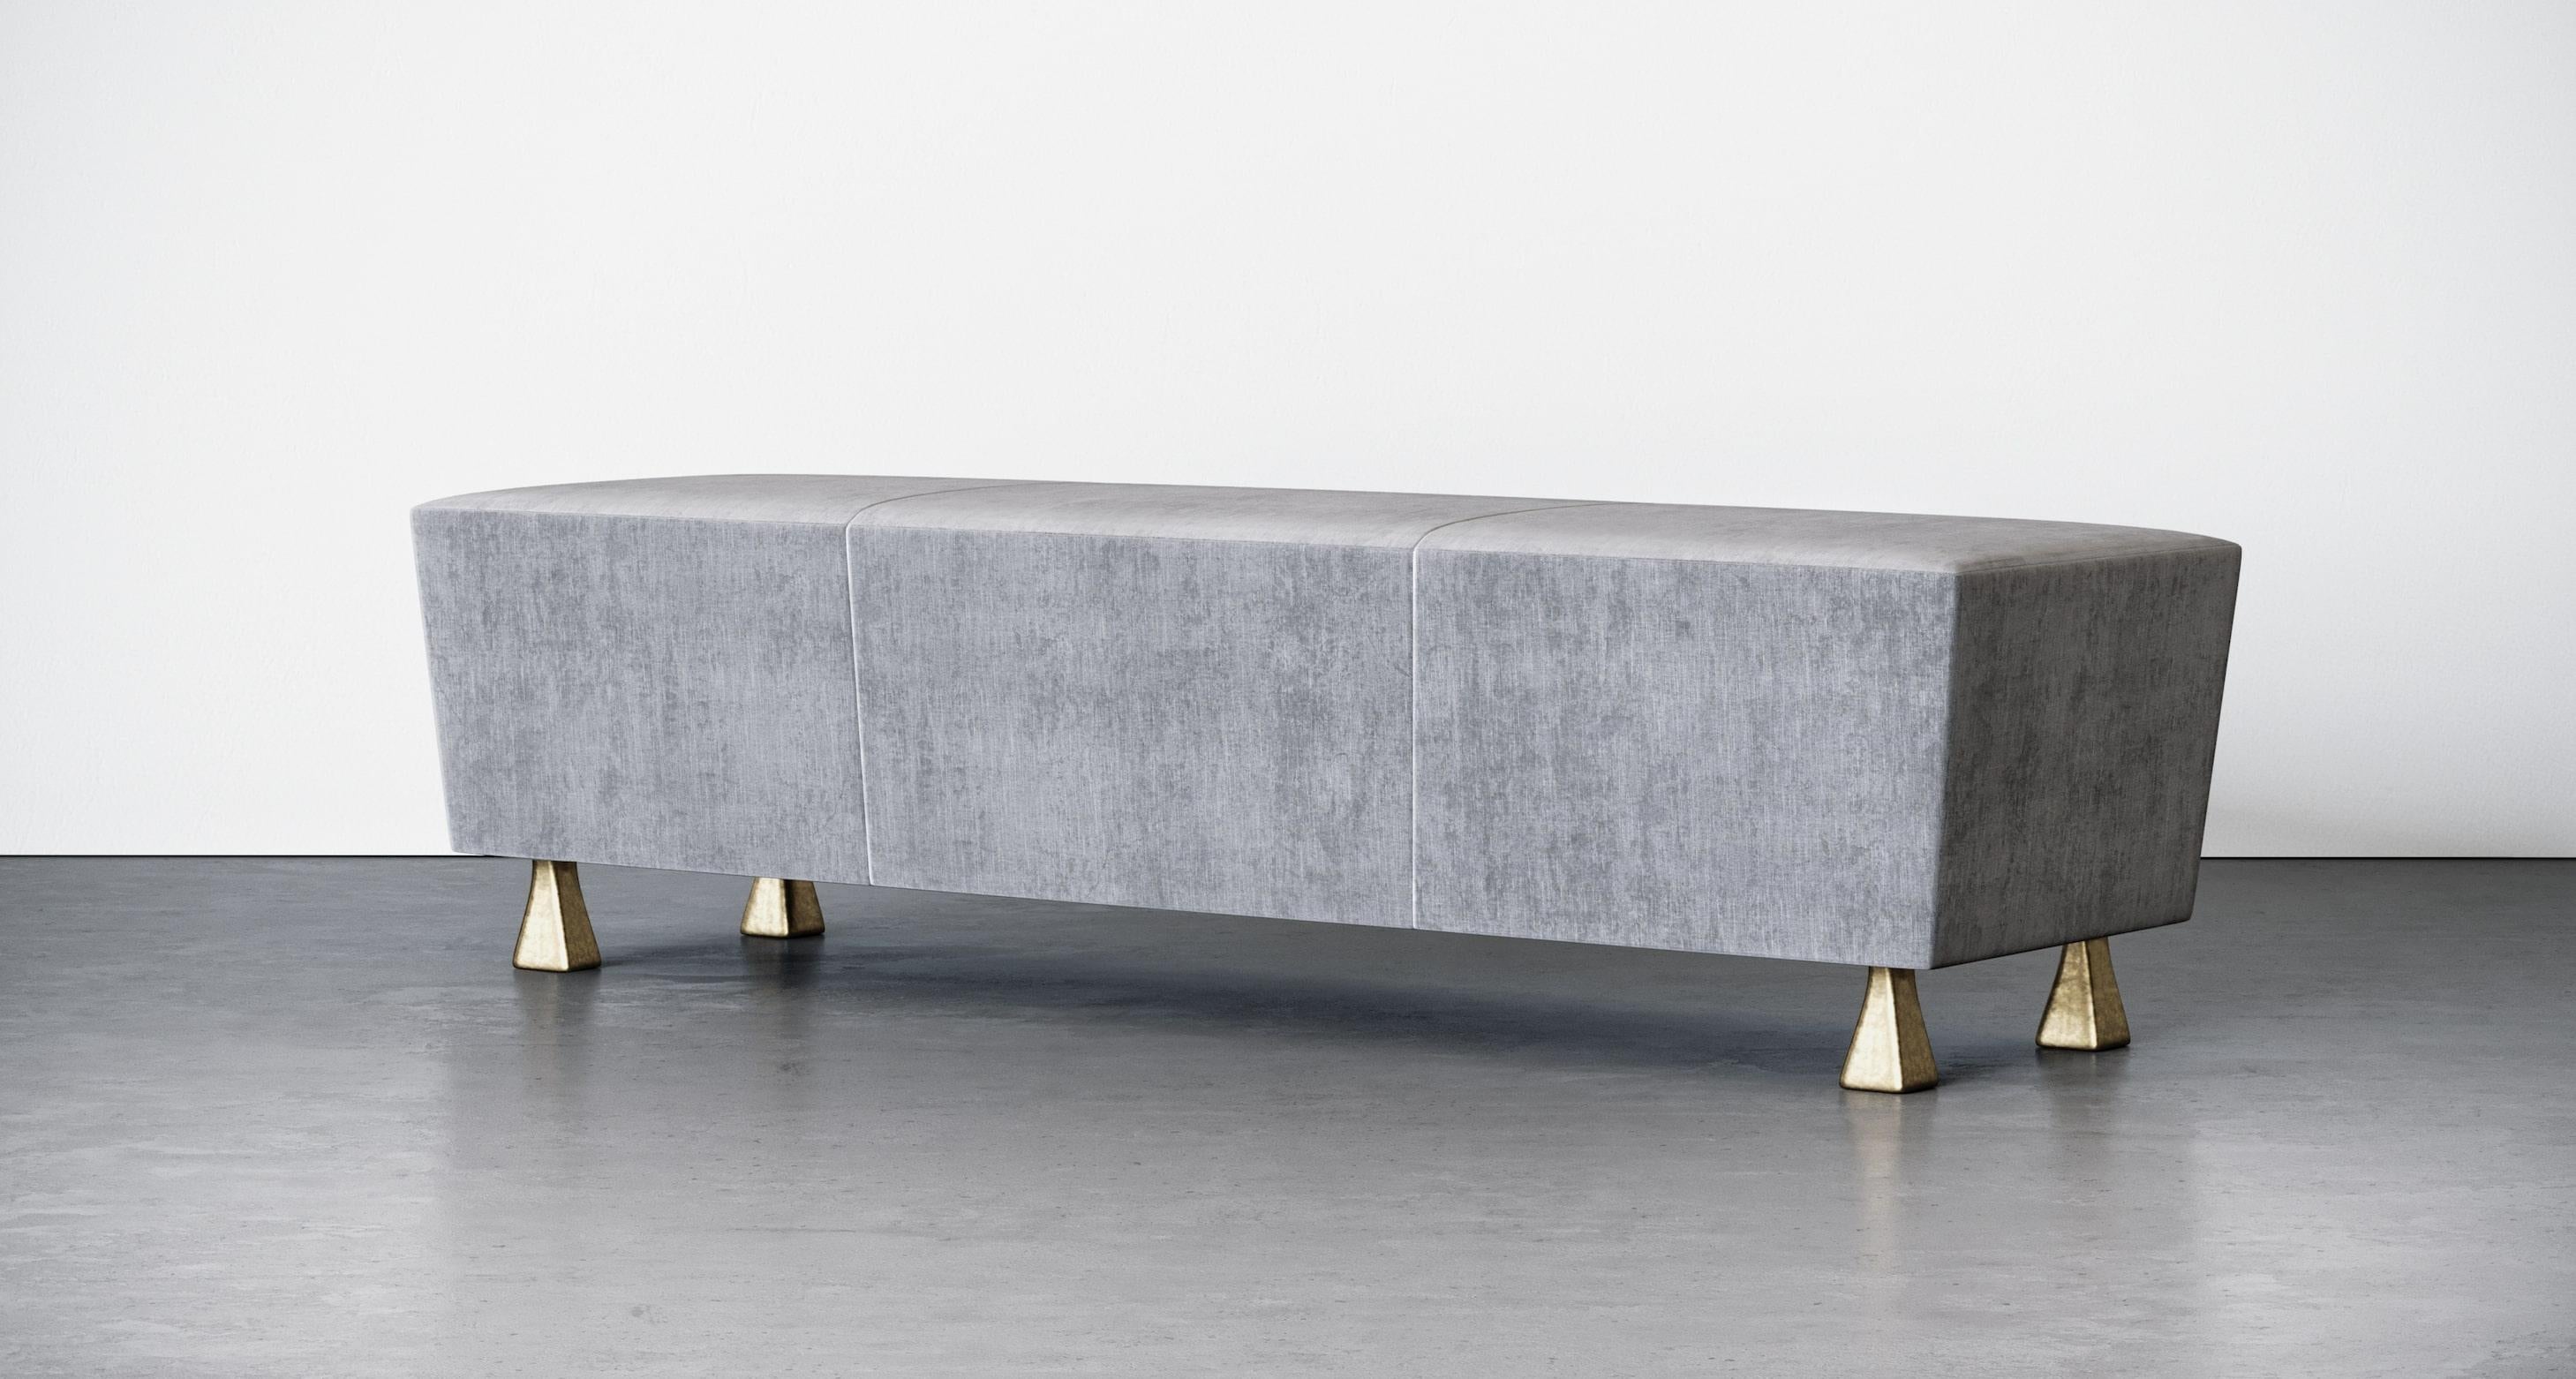 Caballa bench by Aguirre Design
Dimensions: L 163 x W 36 x H 43.2 cm
183 x W 45.7 x H 43.2
Materials: Fully upholstered blind stitches
 Tight seat with angled corners
 Cast bronze squared legs

Combining traditional craftsmanship and